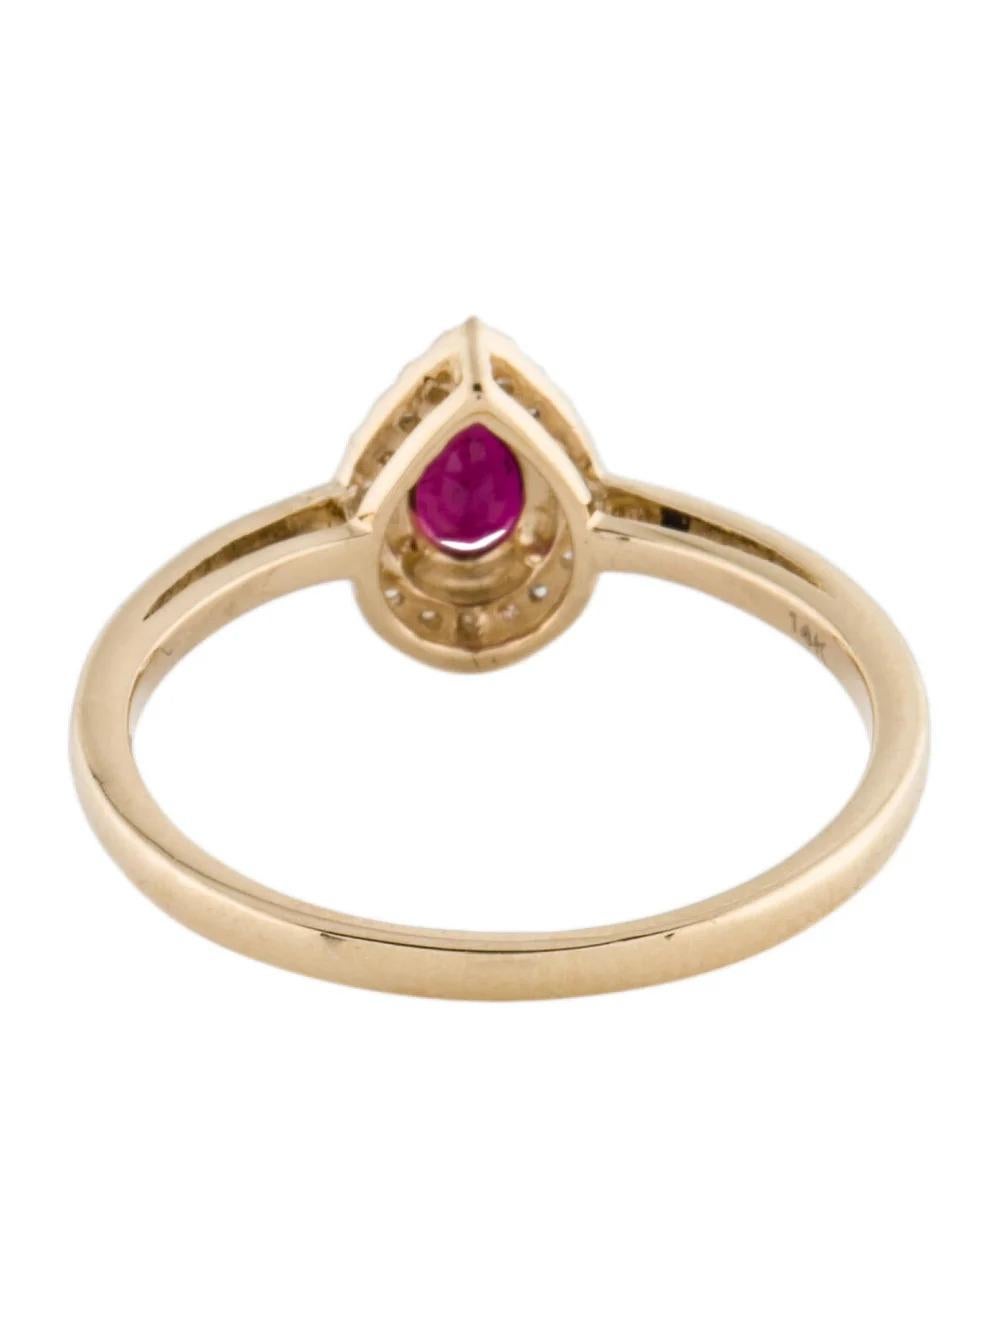 14K Tourmaline & Diamond Cocktail Ring - Size 7.25 - Vibrant Gemstone, Luxury In New Condition For Sale In Holtsville, NY